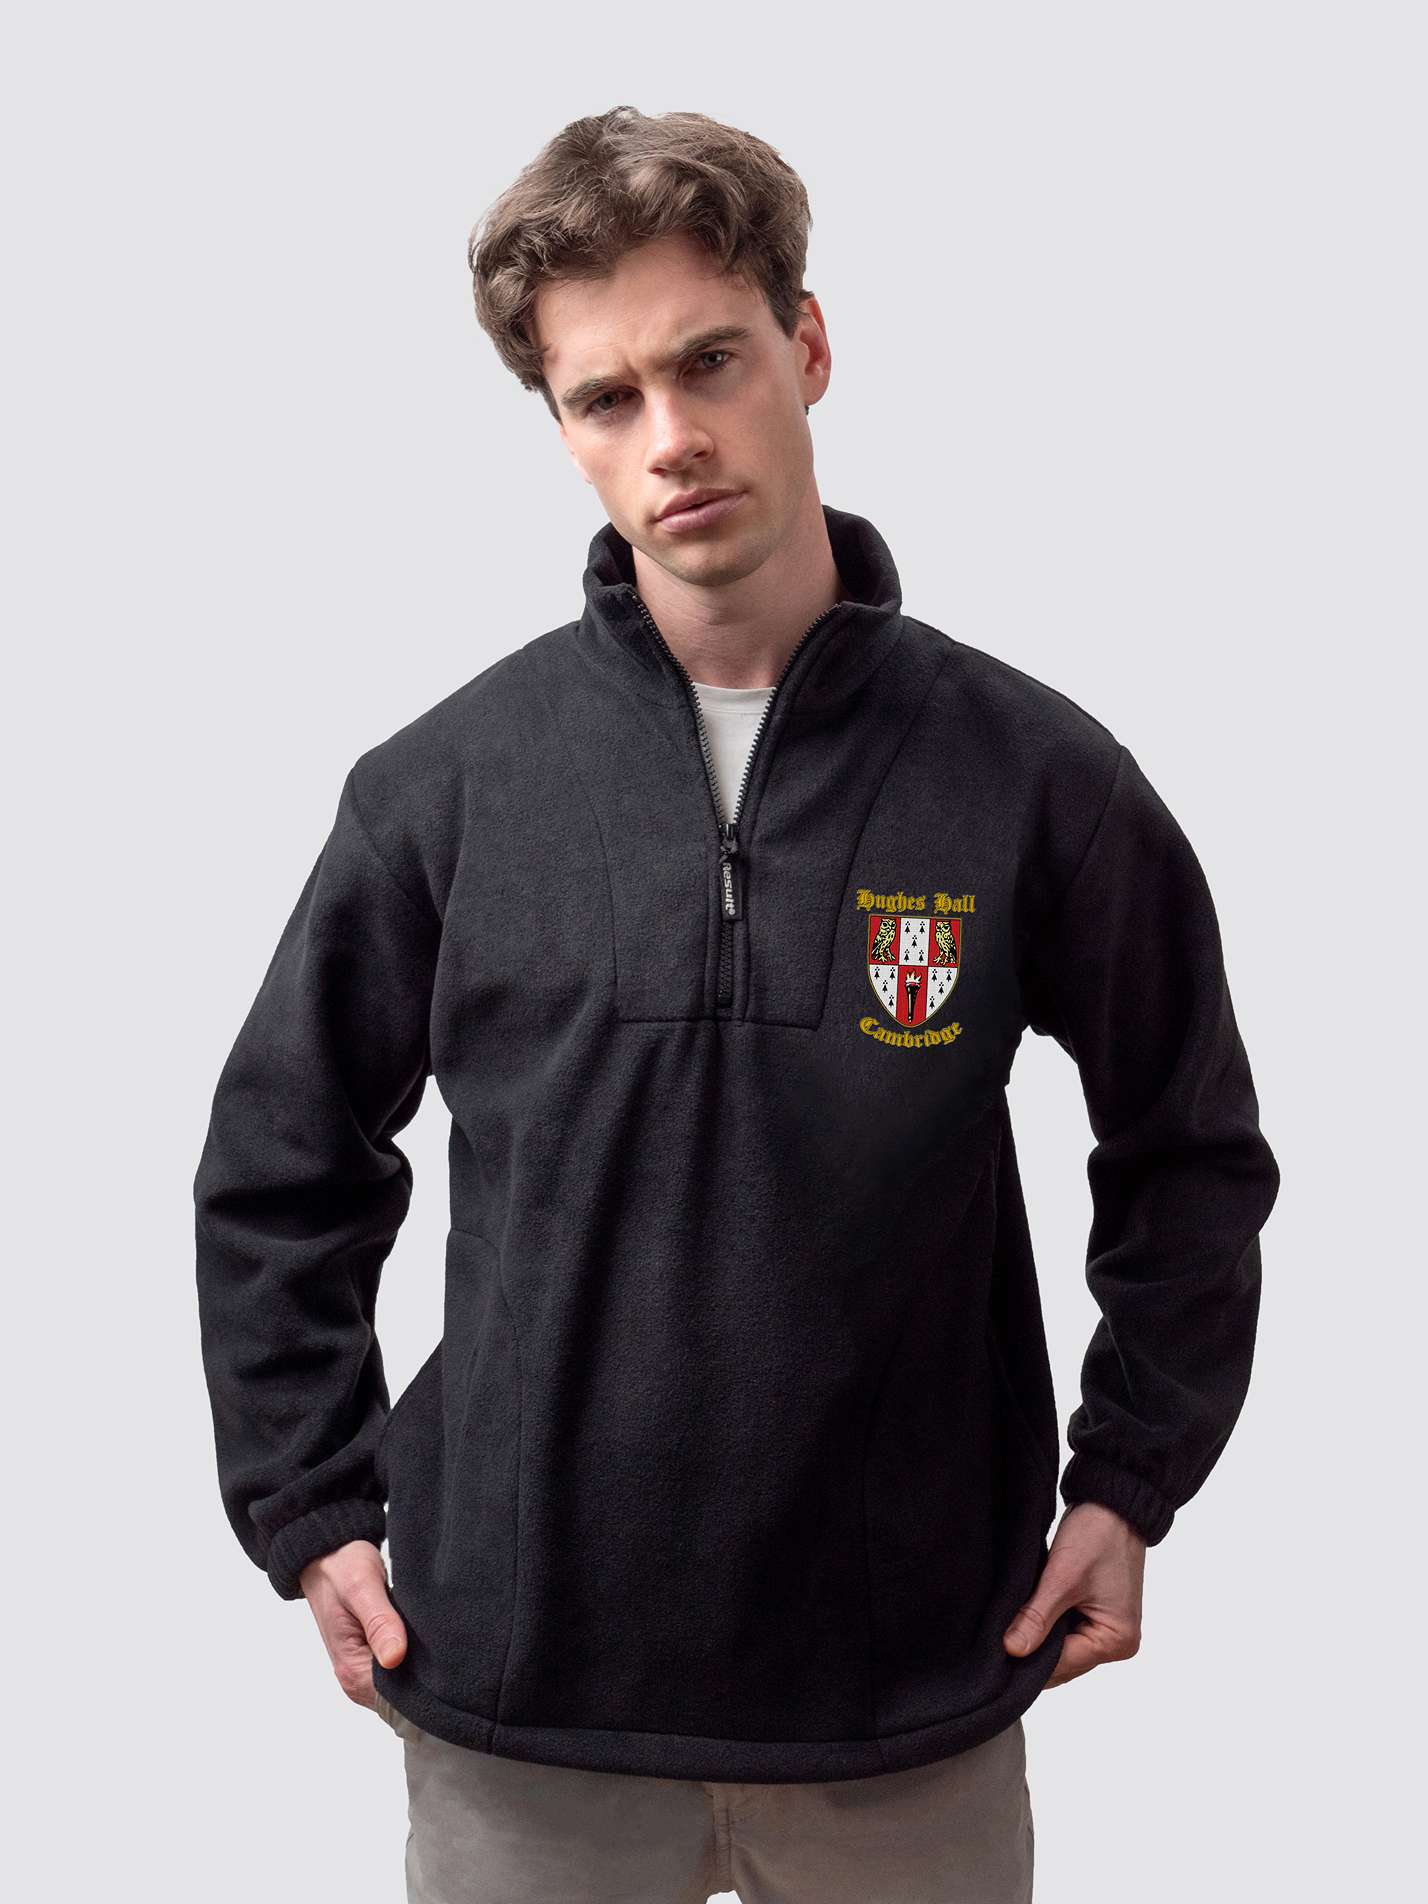 Cambridge university fleece, with custom embroidered initials and Hughes Hall crest